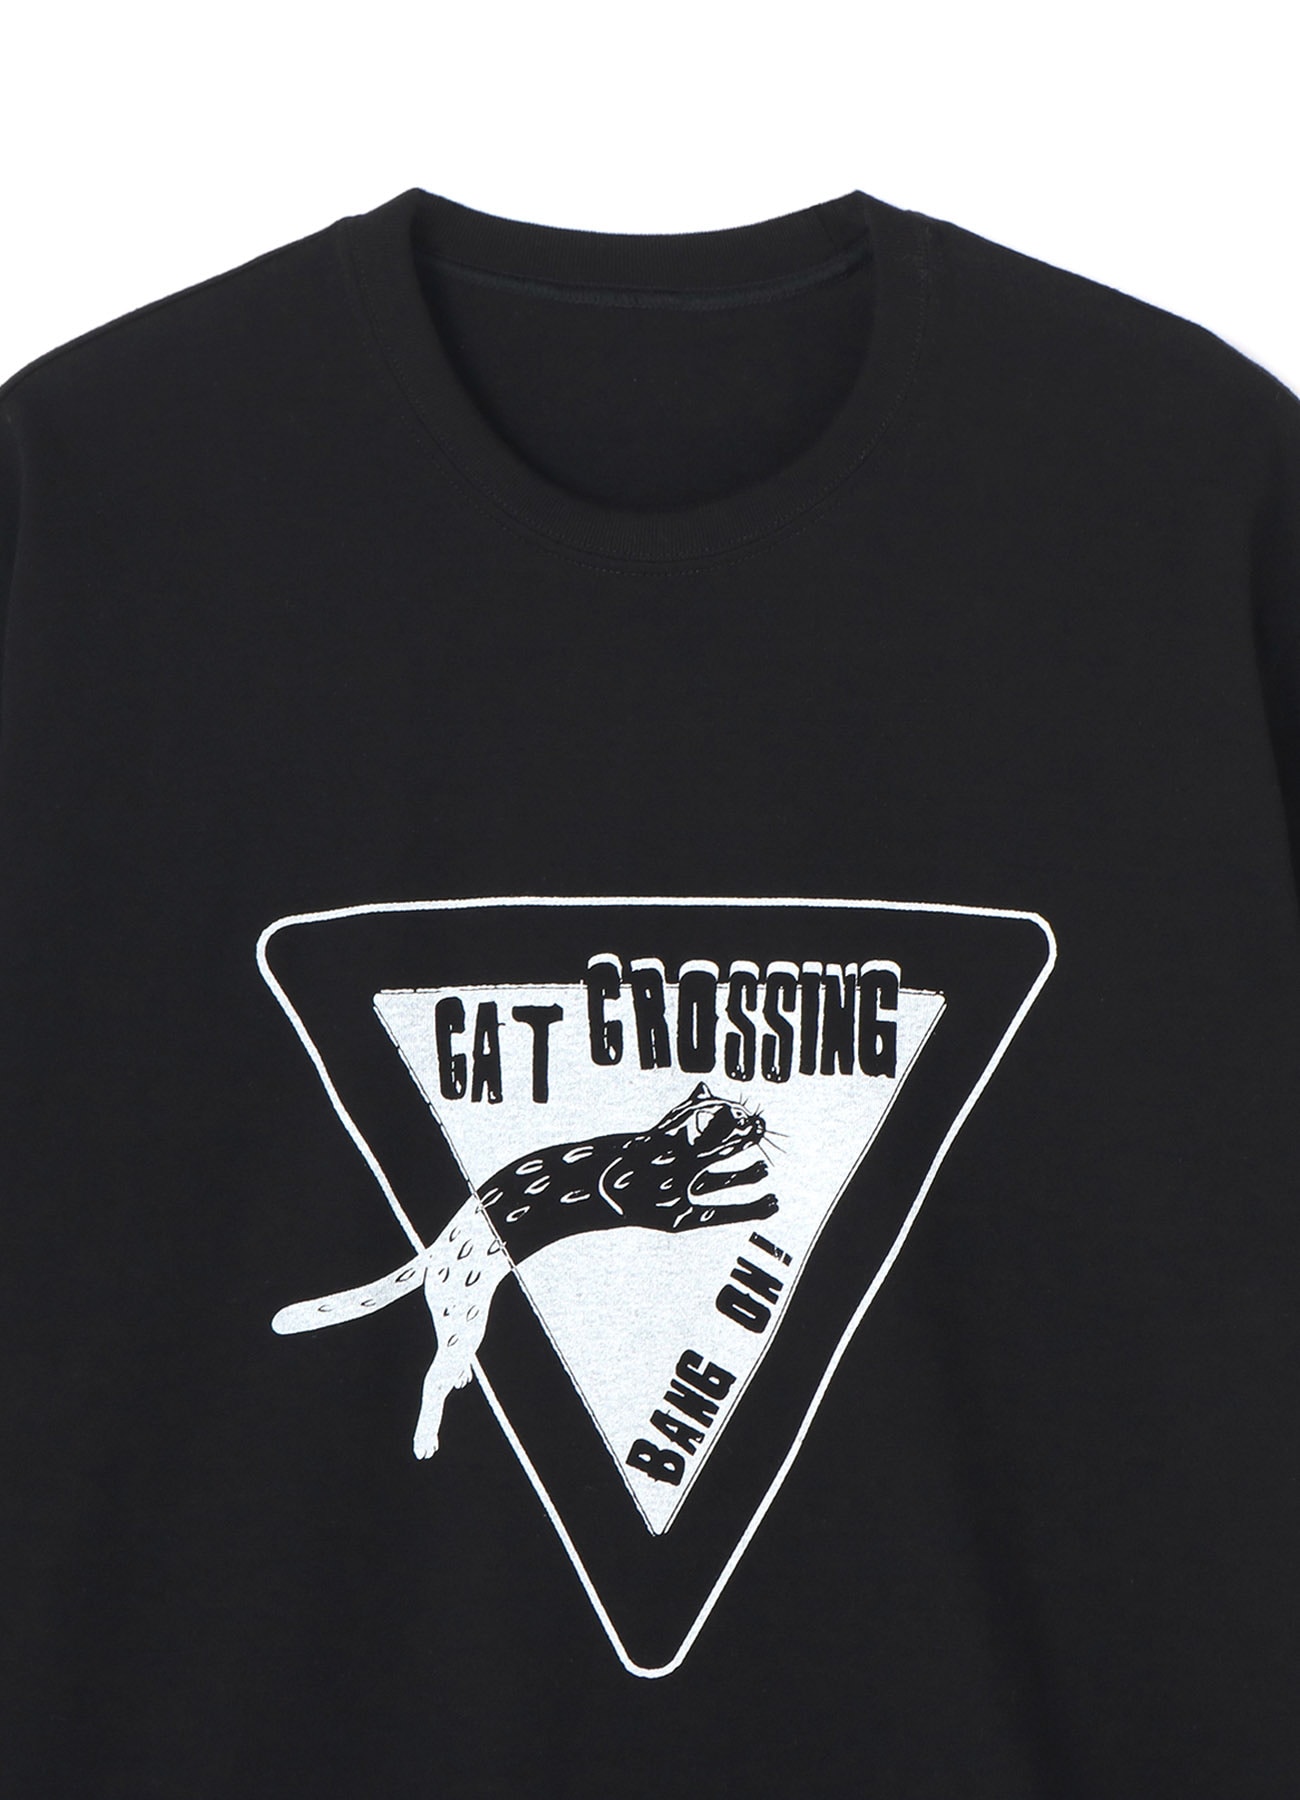 Y's BANG ON!ROAD SIGN T-Shirt CAT CROSSING